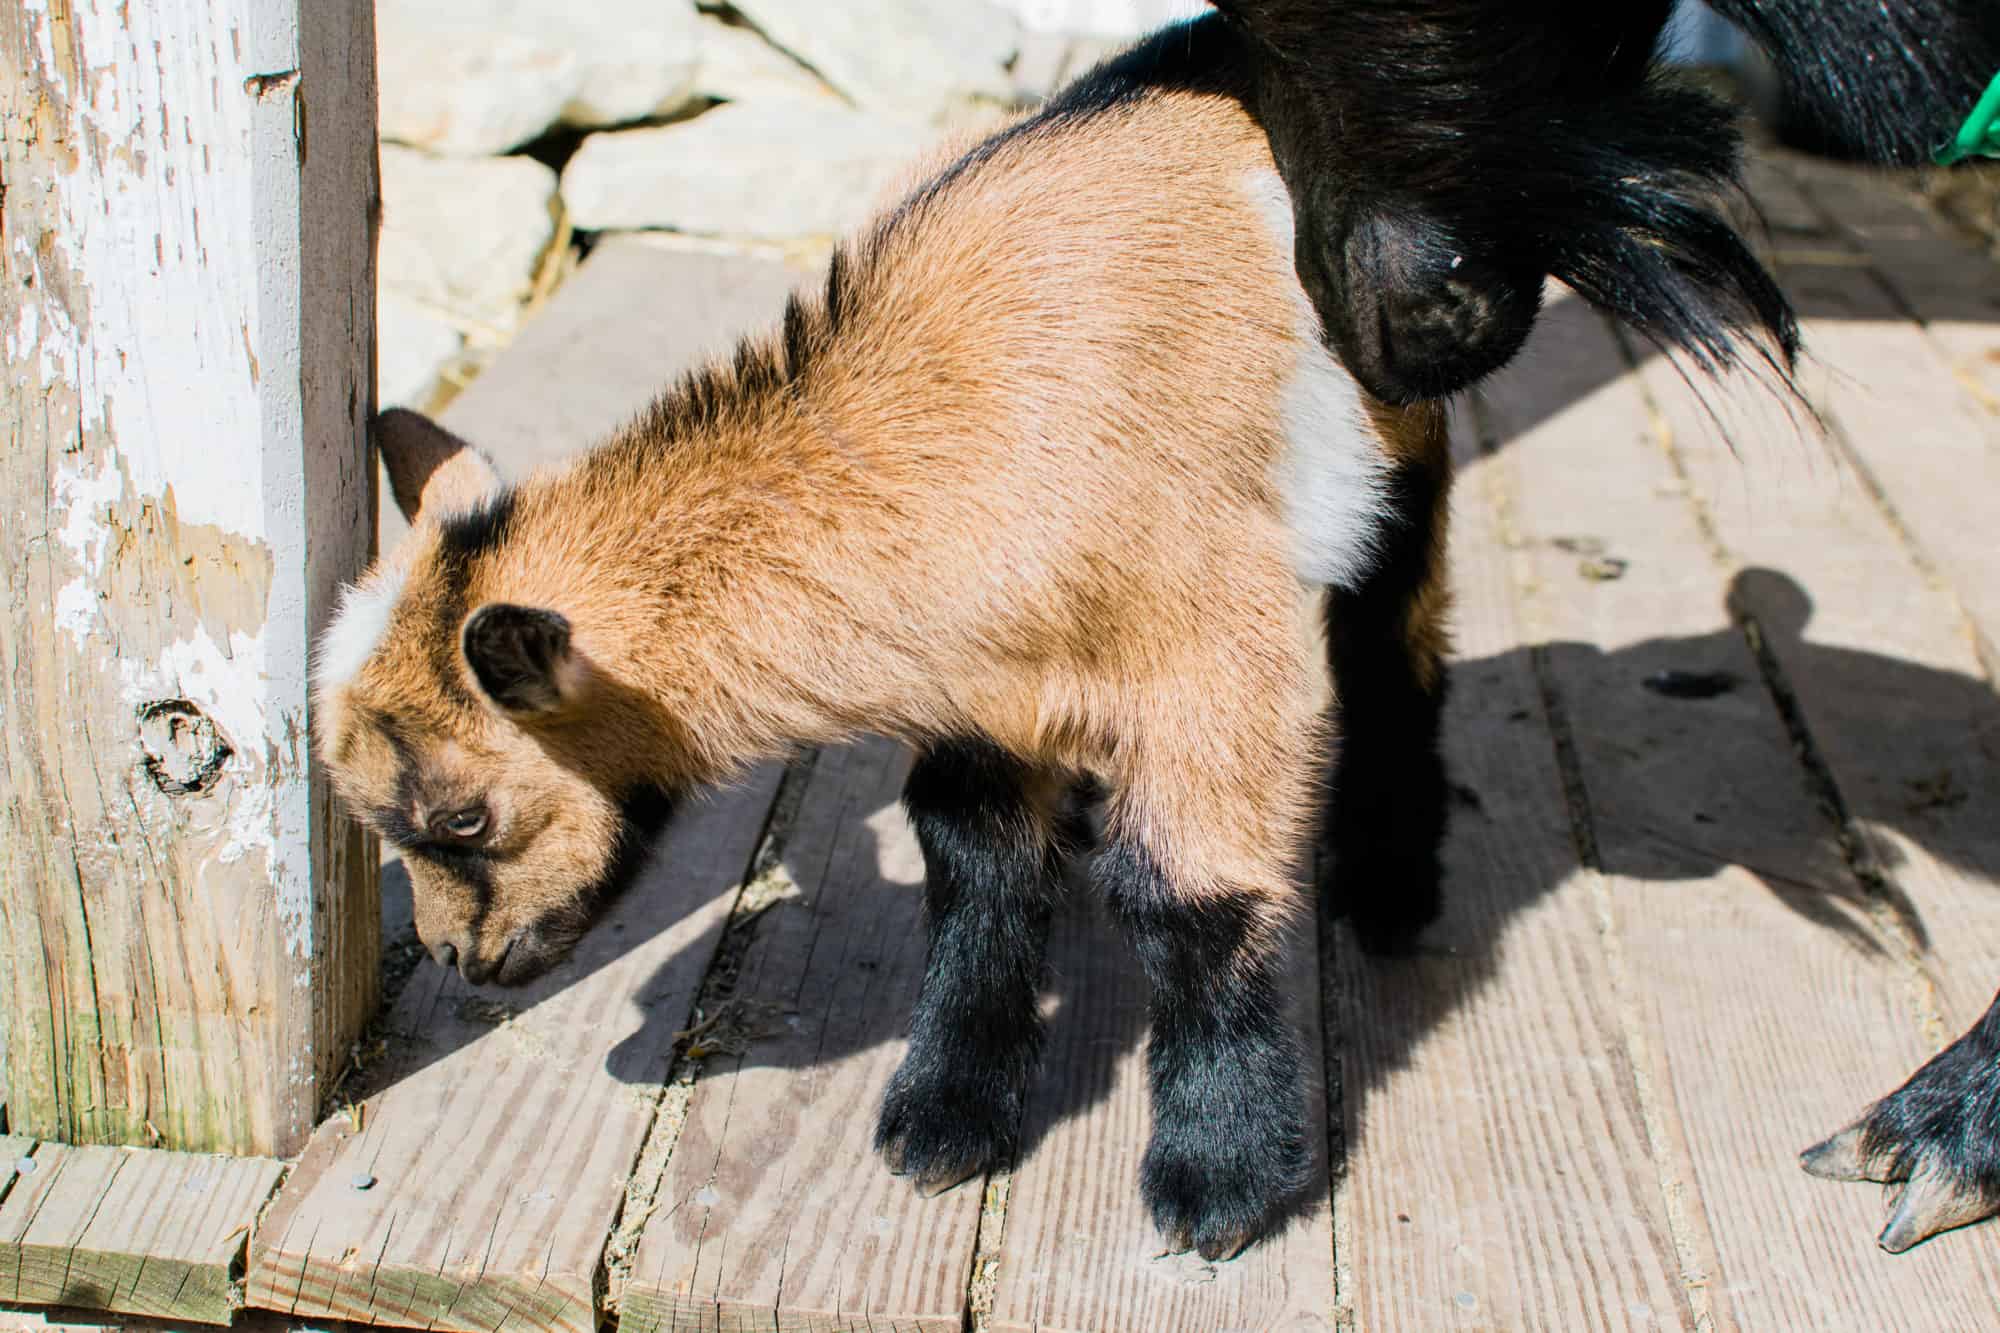 Frenchie Farm cutest baby goats ever